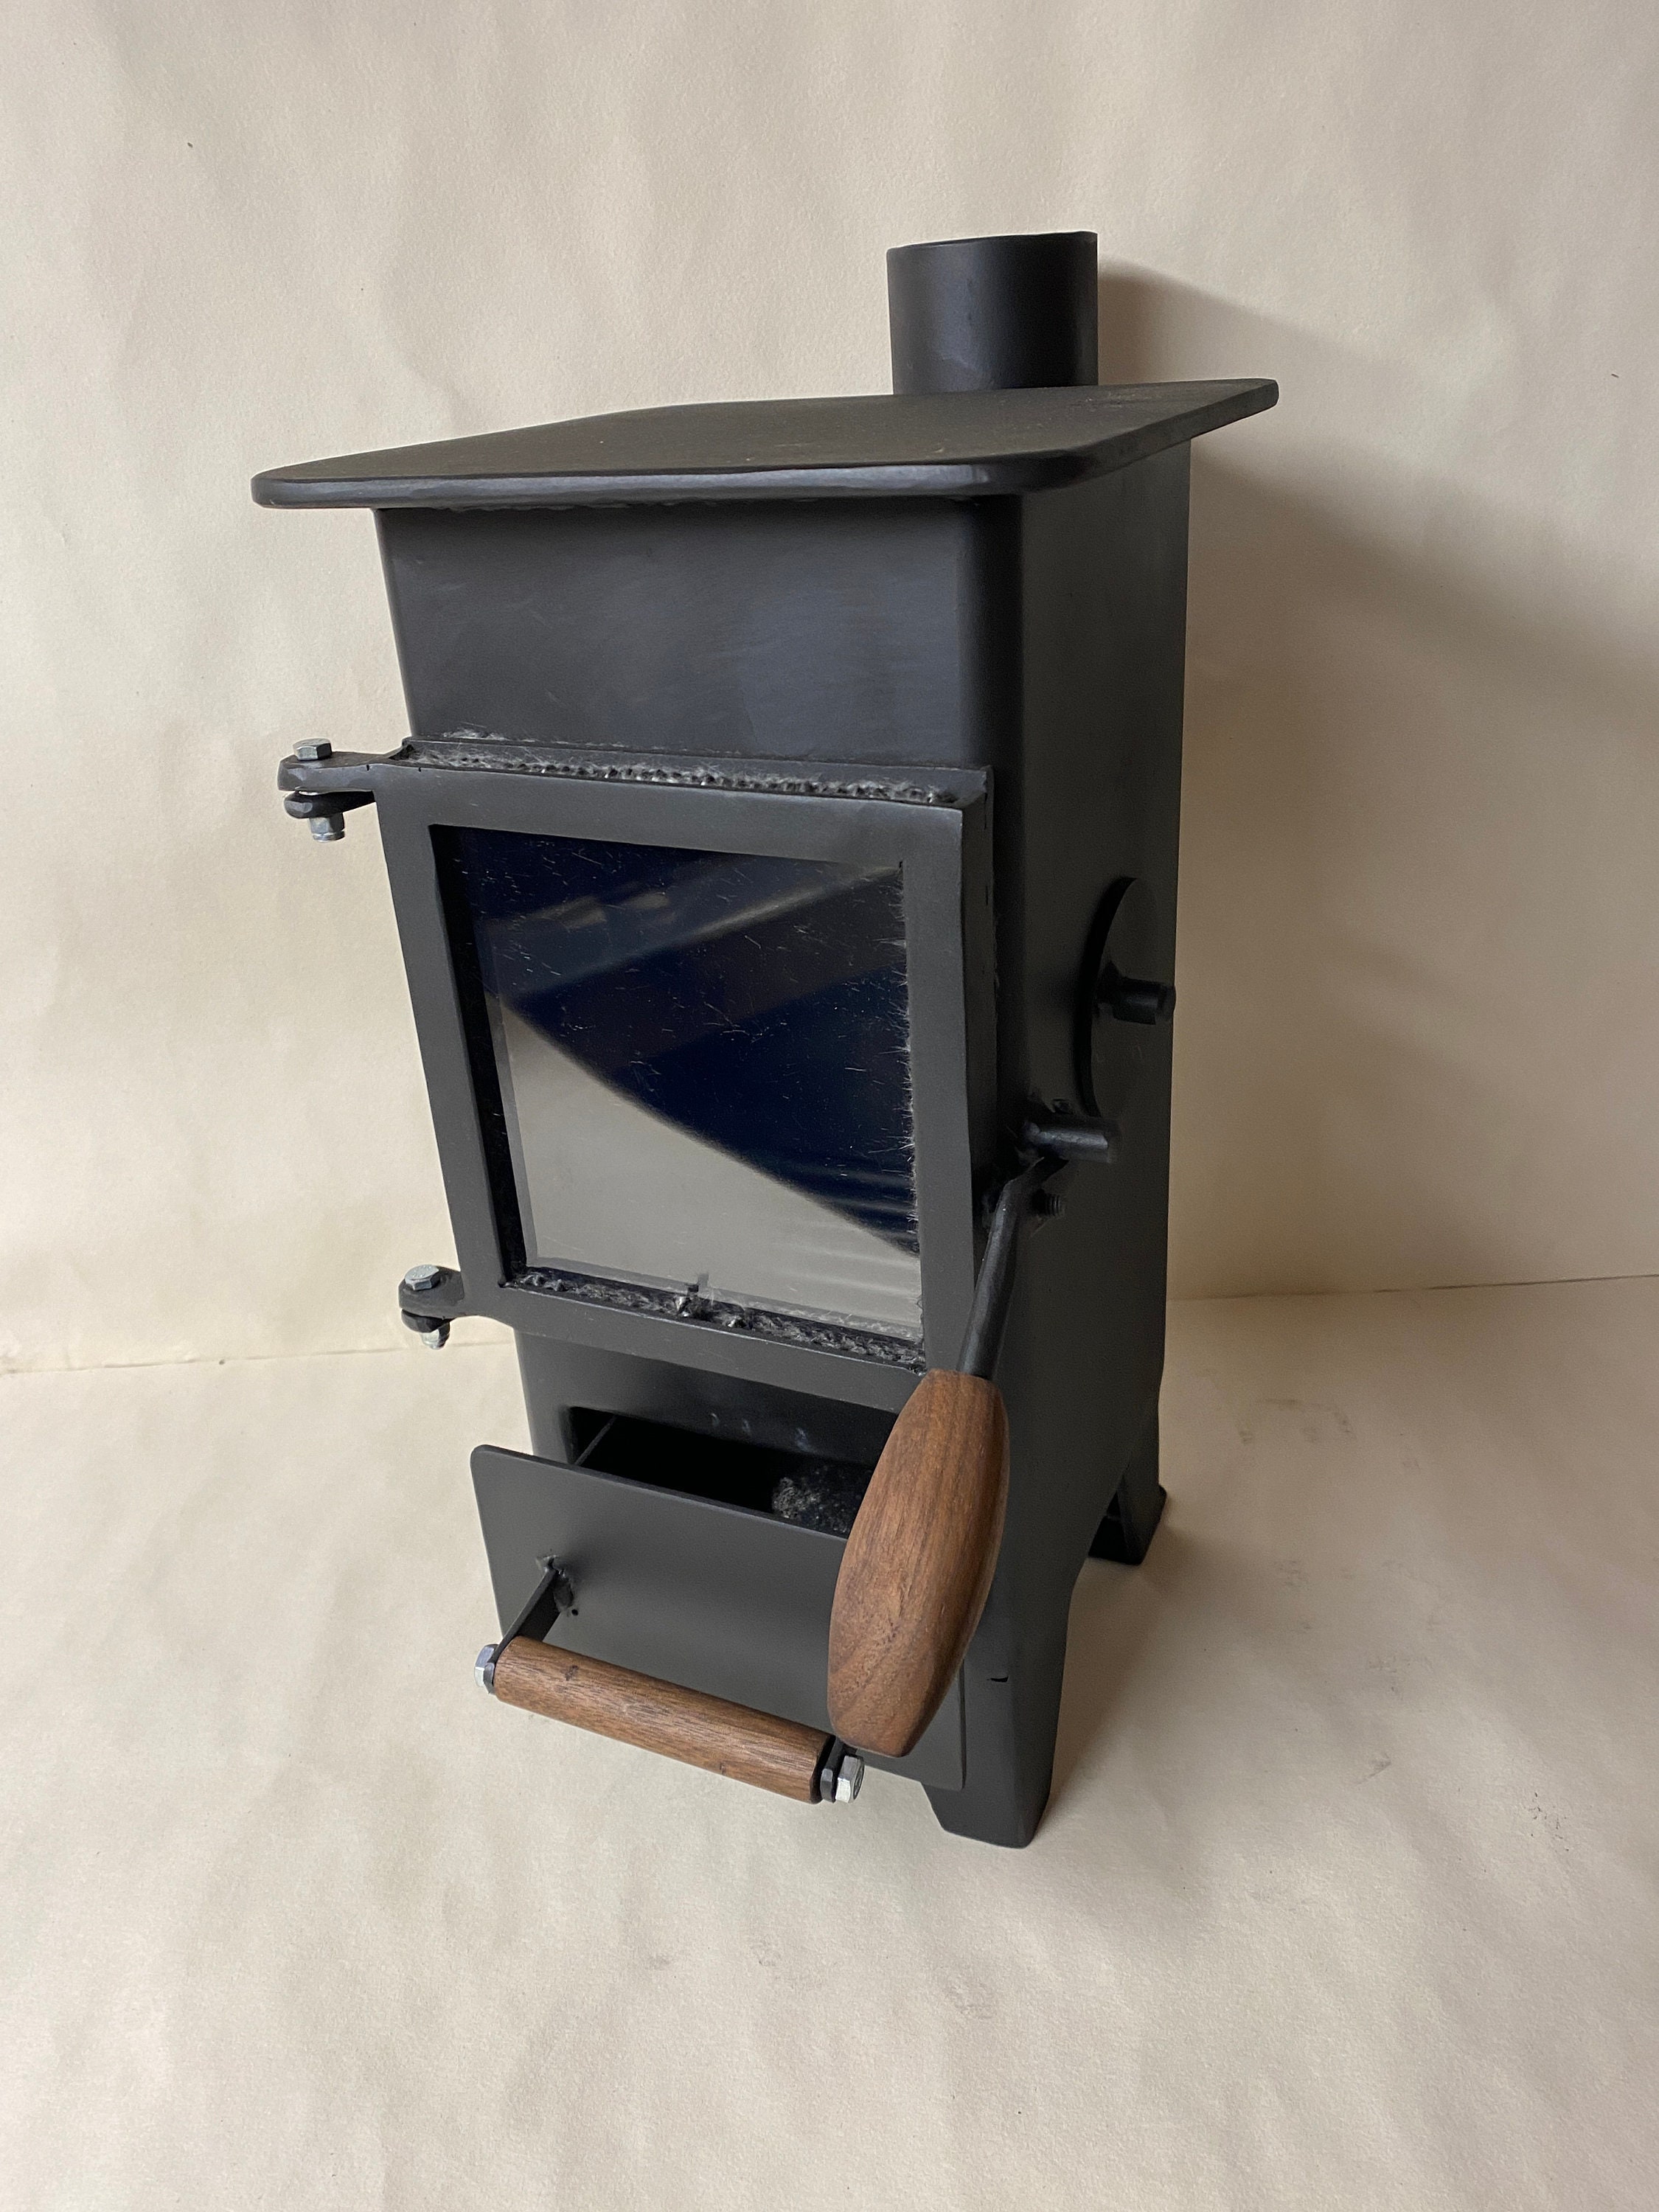 Iron Cast Wood Stove Farmhouse Kitchen Cooking Front Windoved Portable  Tinyhouse Fire Place Stove Home Cast Iron Stove Indoor 167 Lbs-76 Kg 